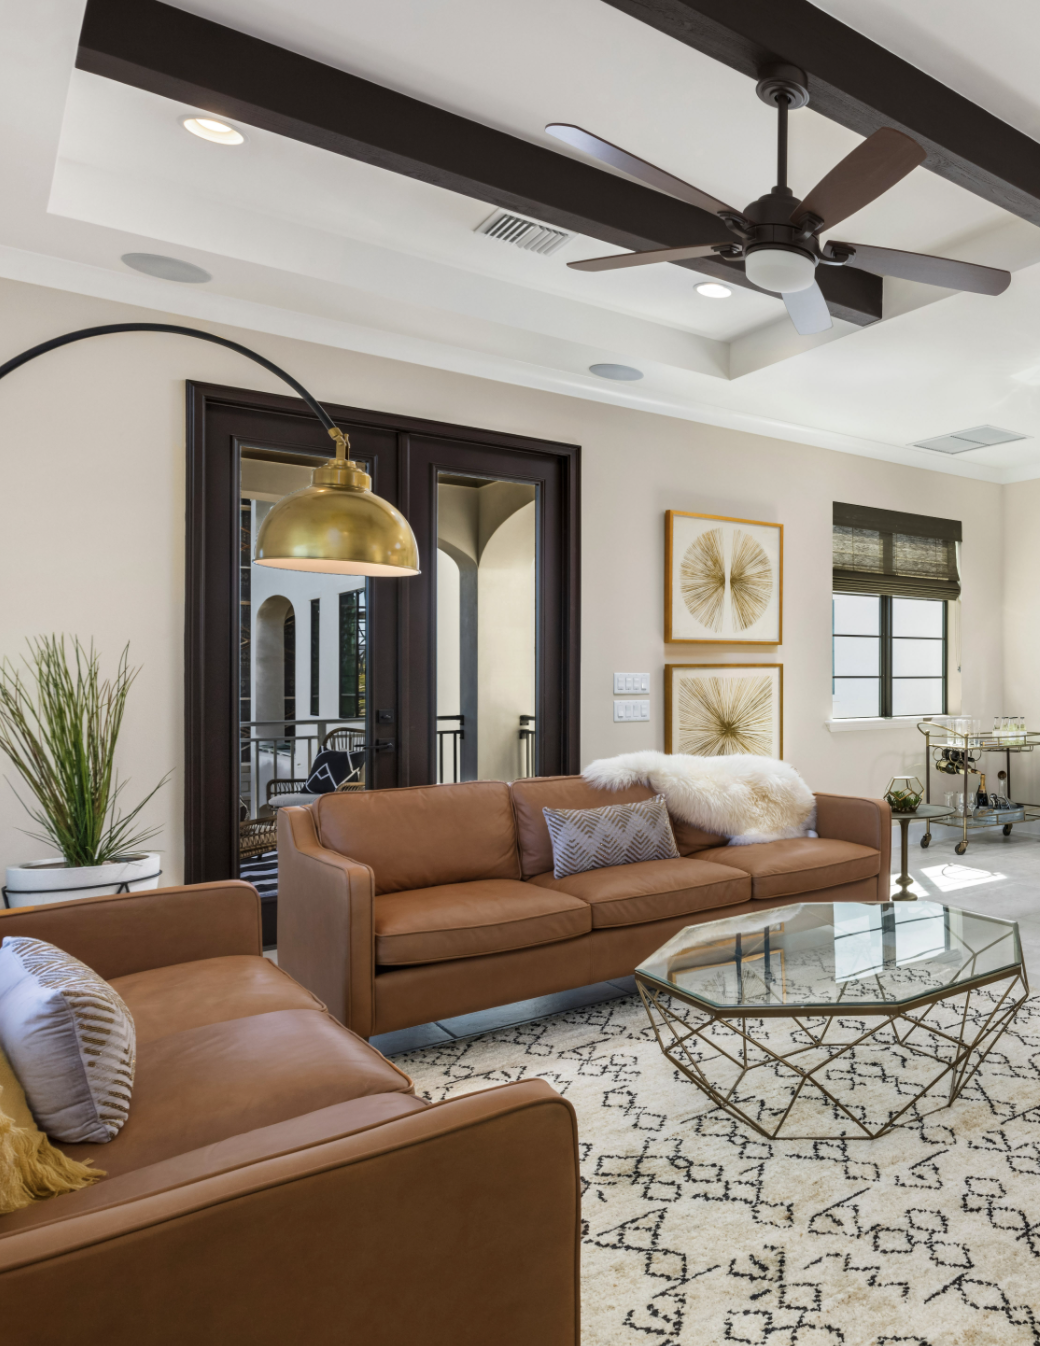 matanilla reef family room with ceiling accents